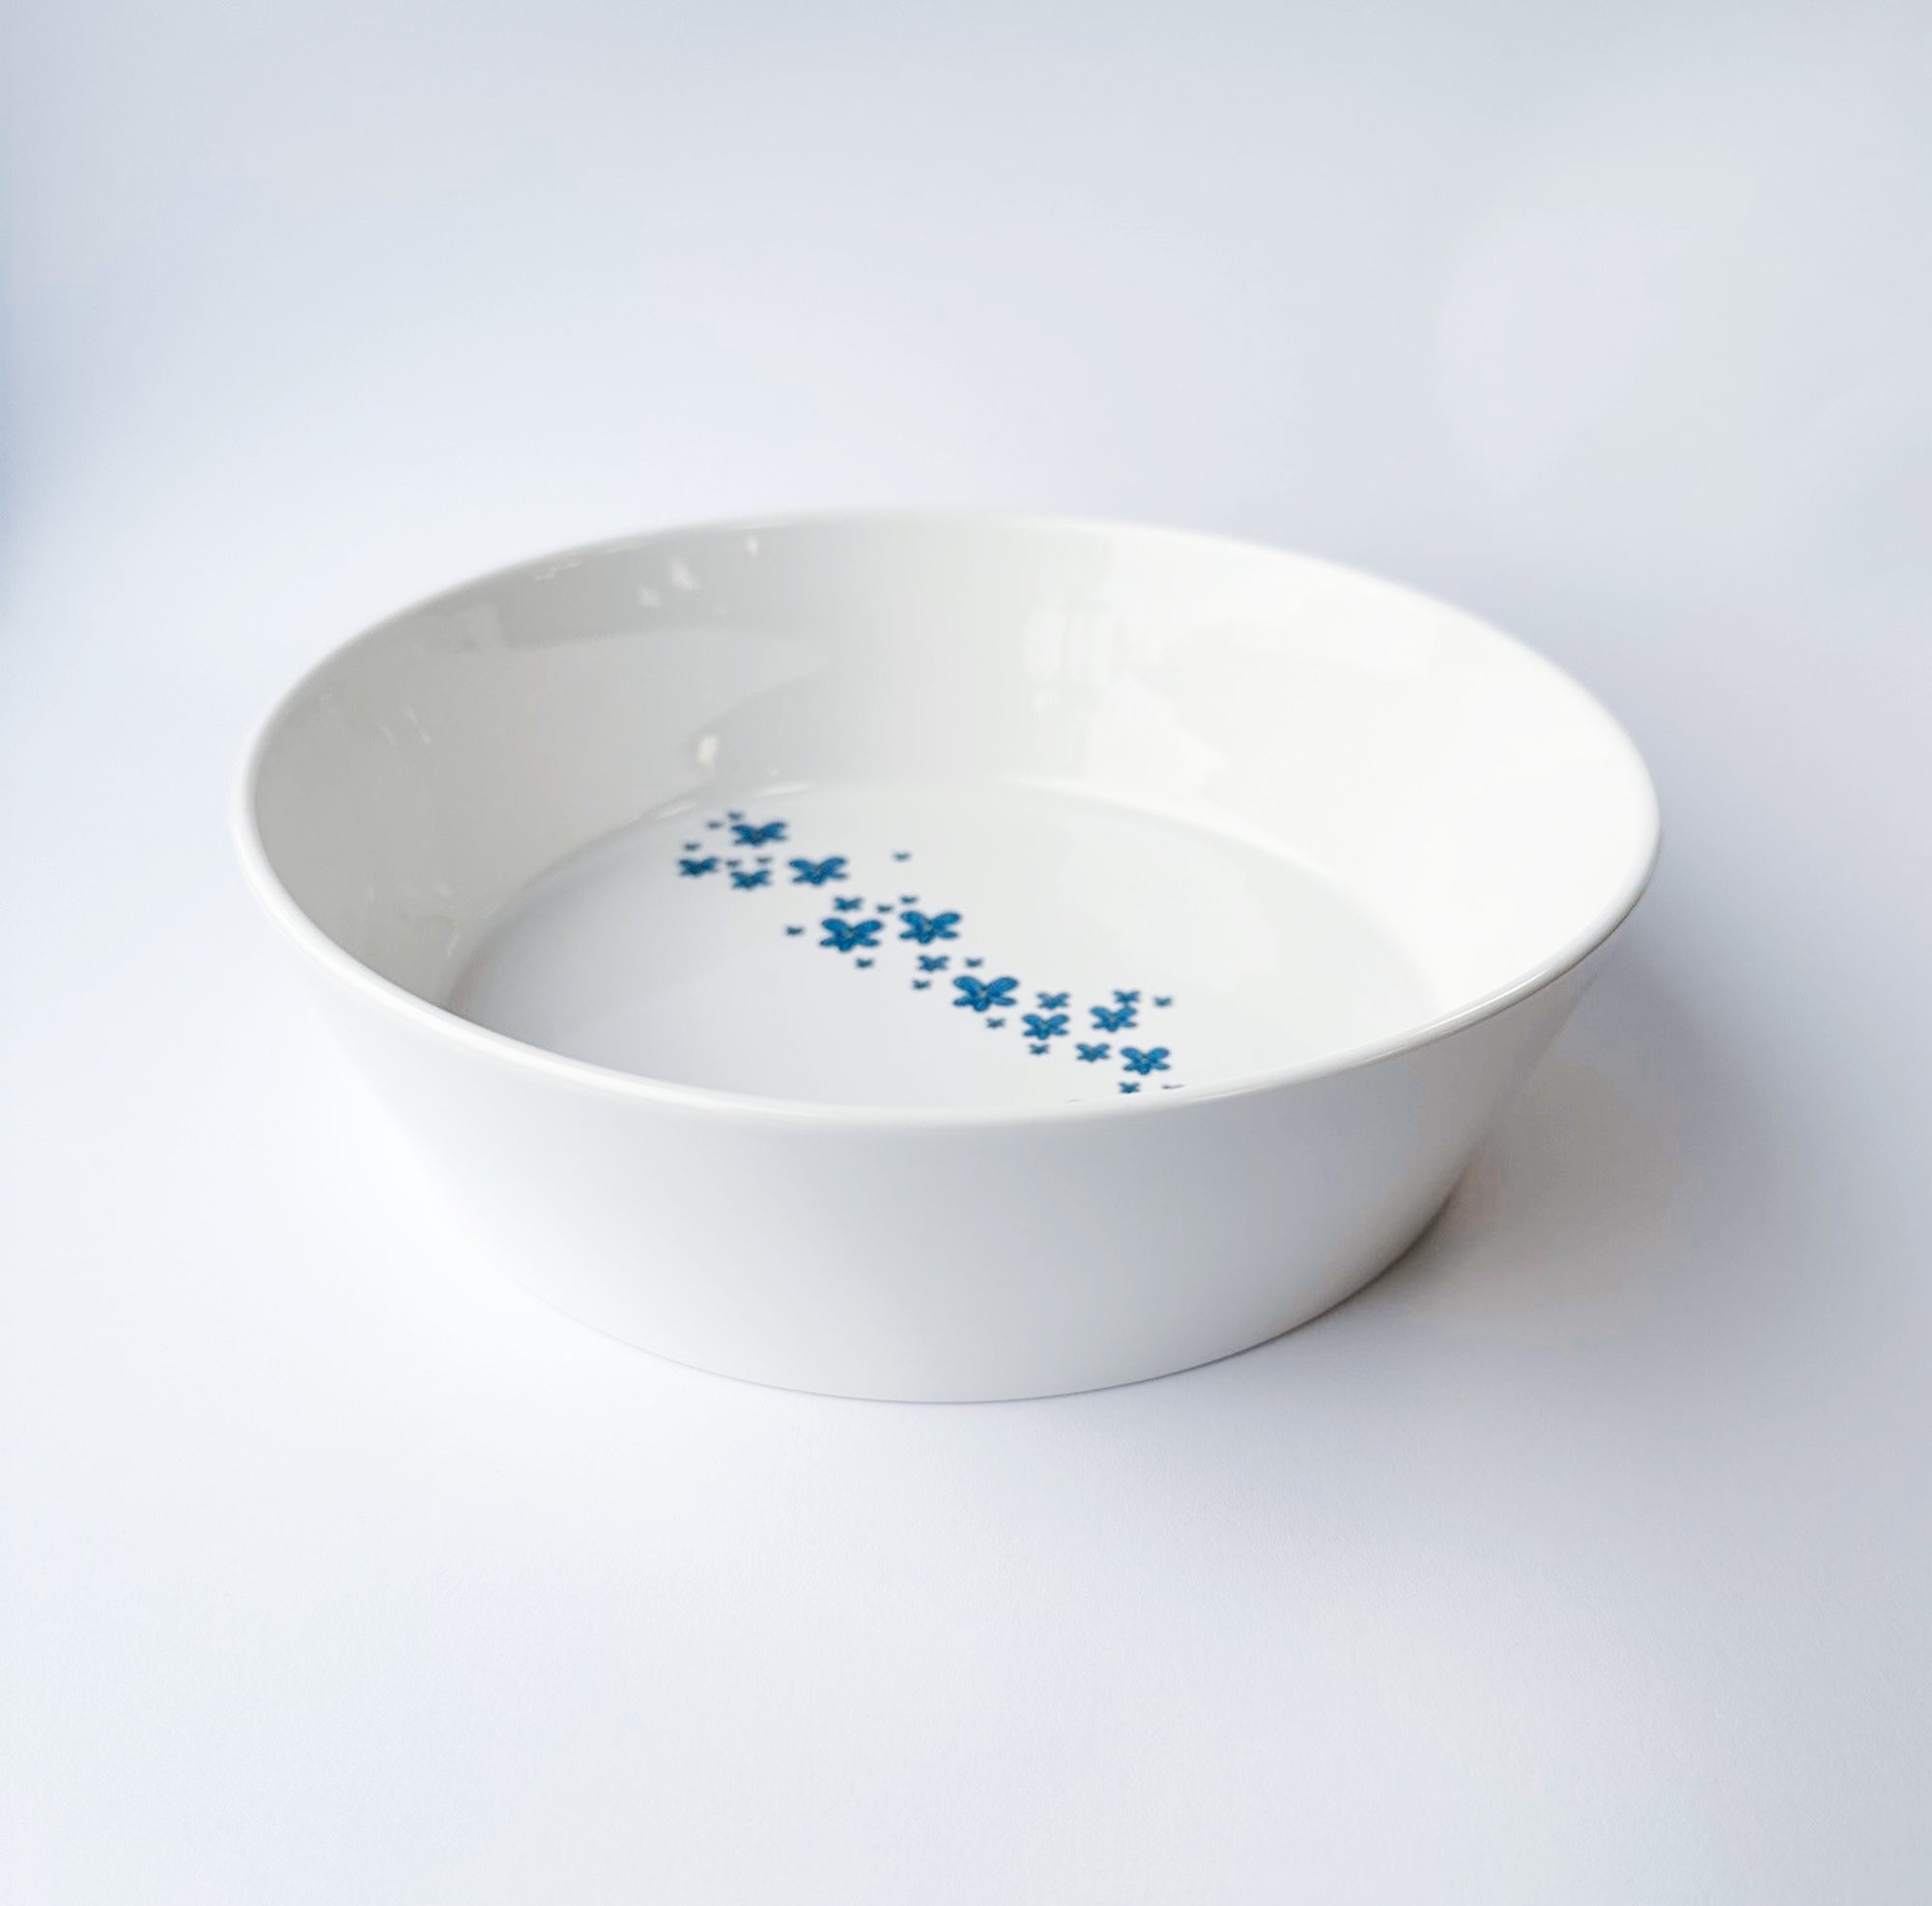 Forget-me-not dog bowl